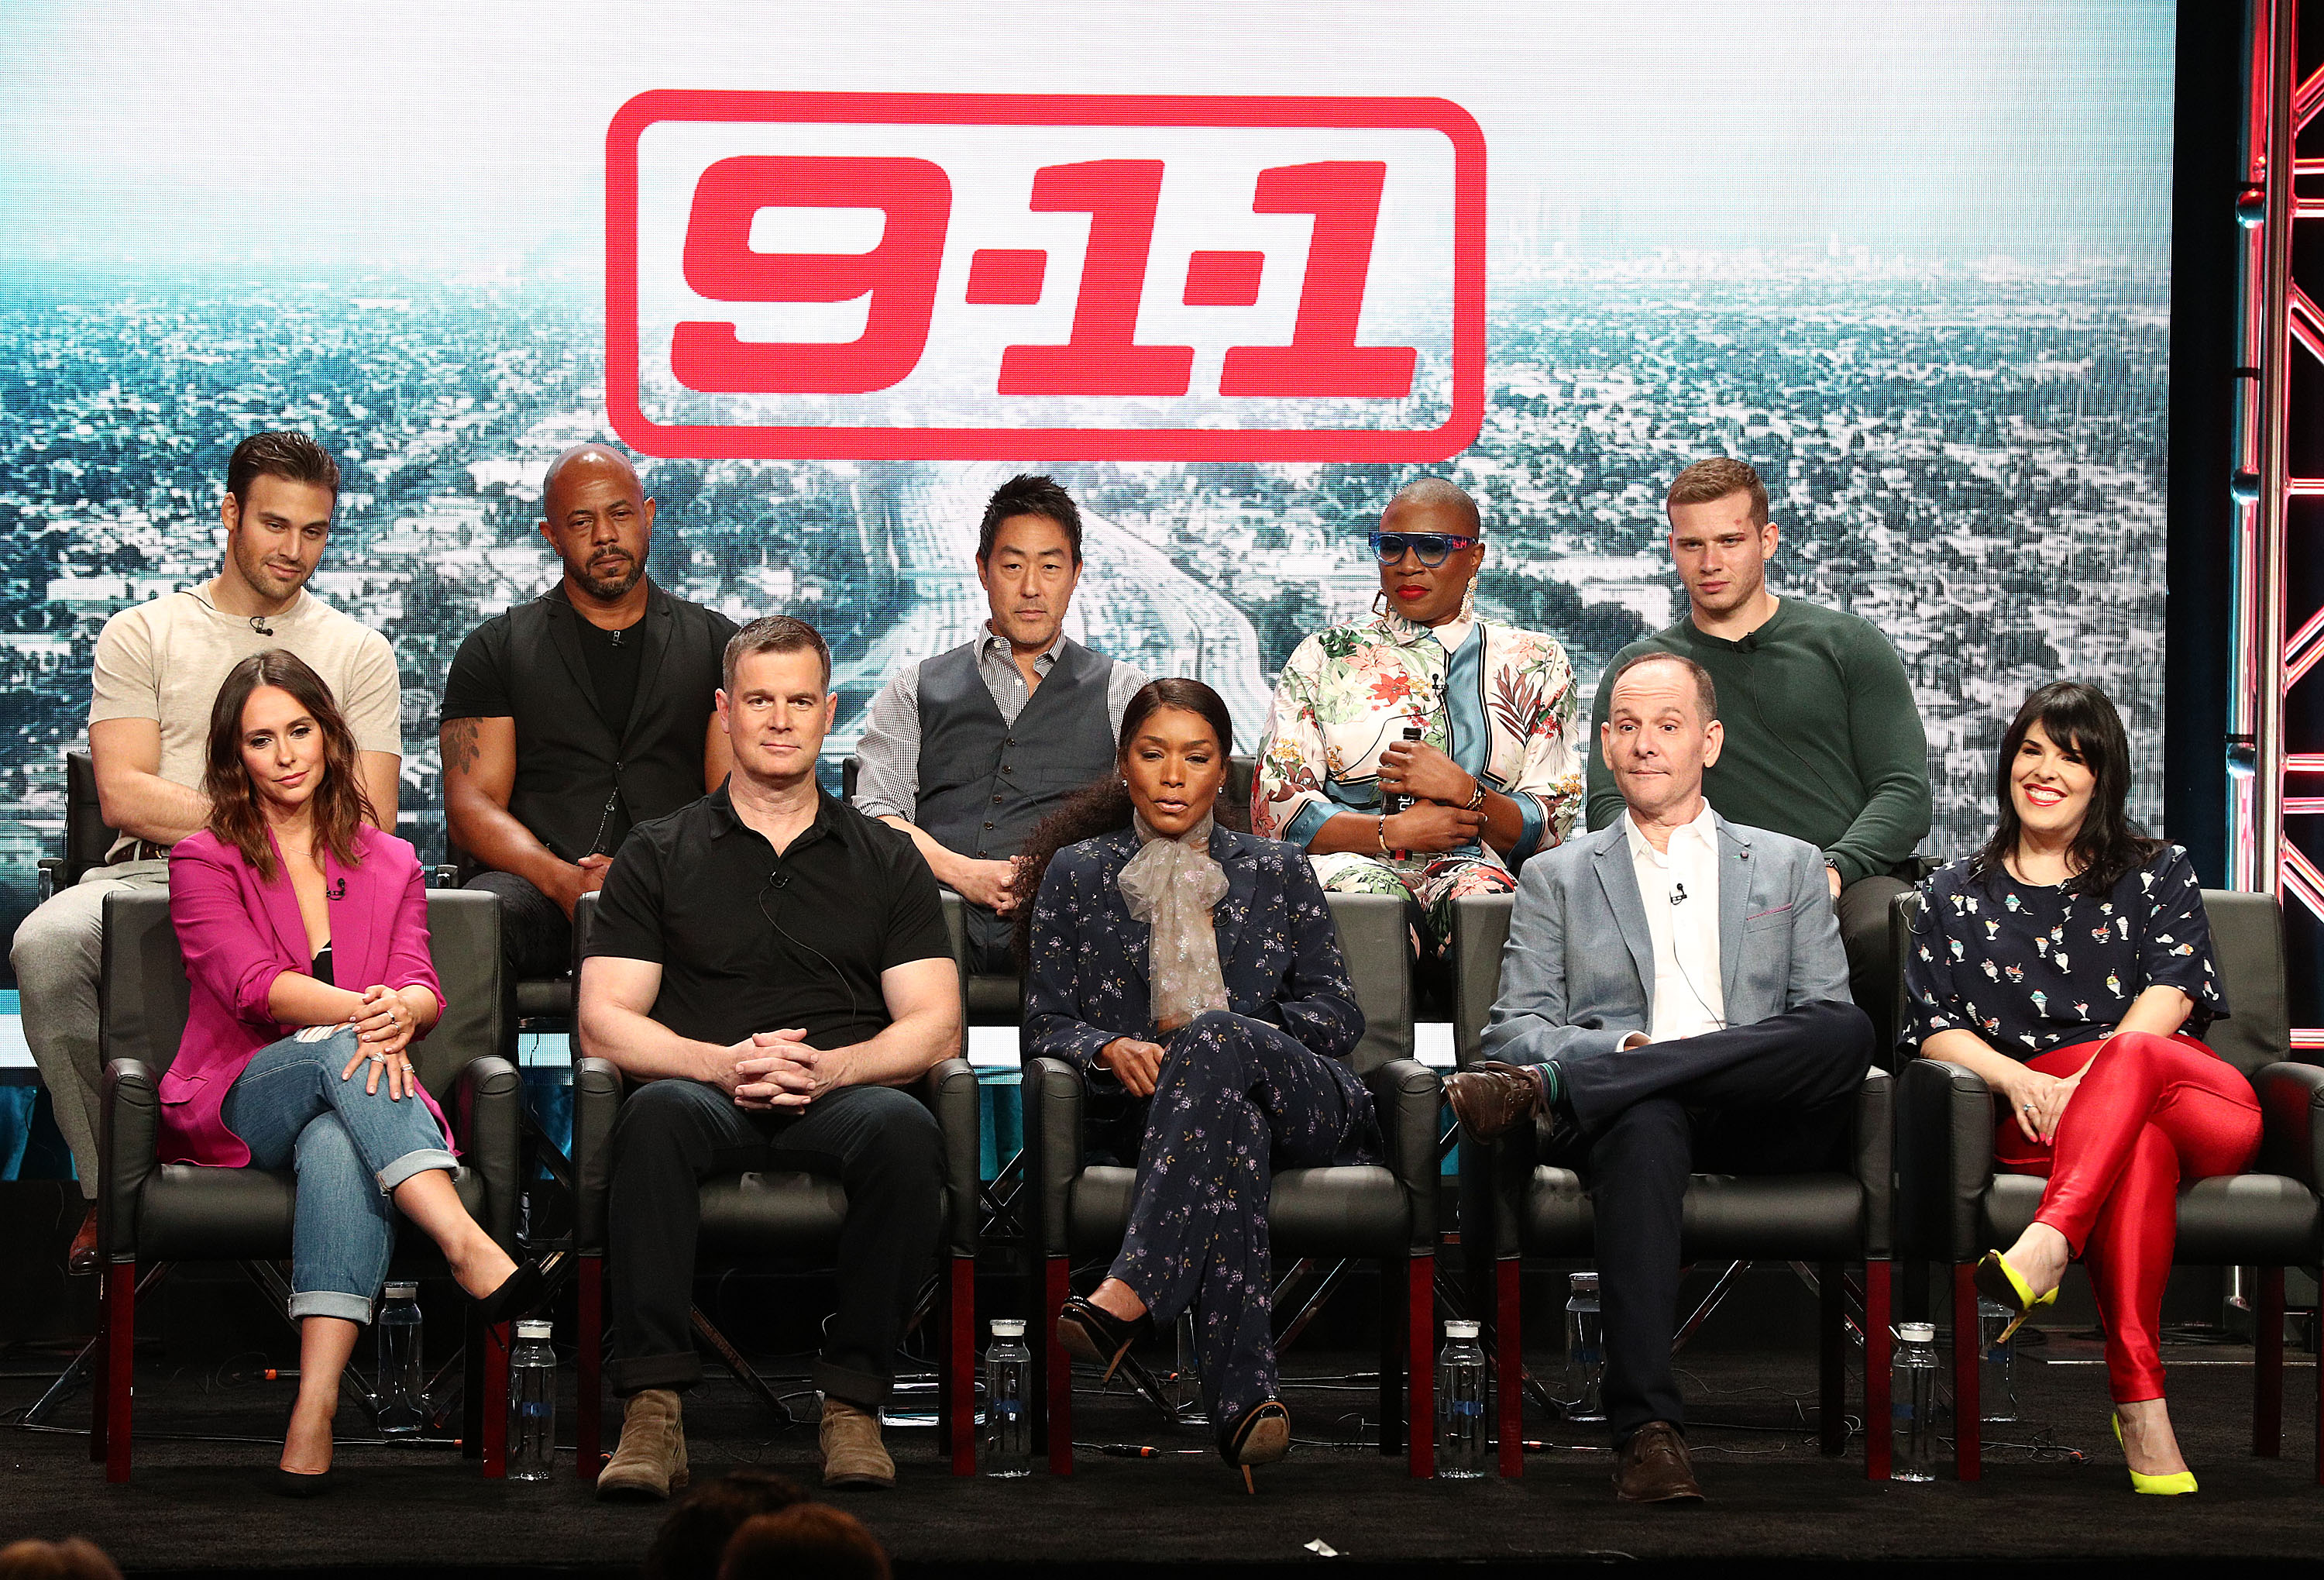 '9-1-1' cast on stage at the at TCA press tour in 2018